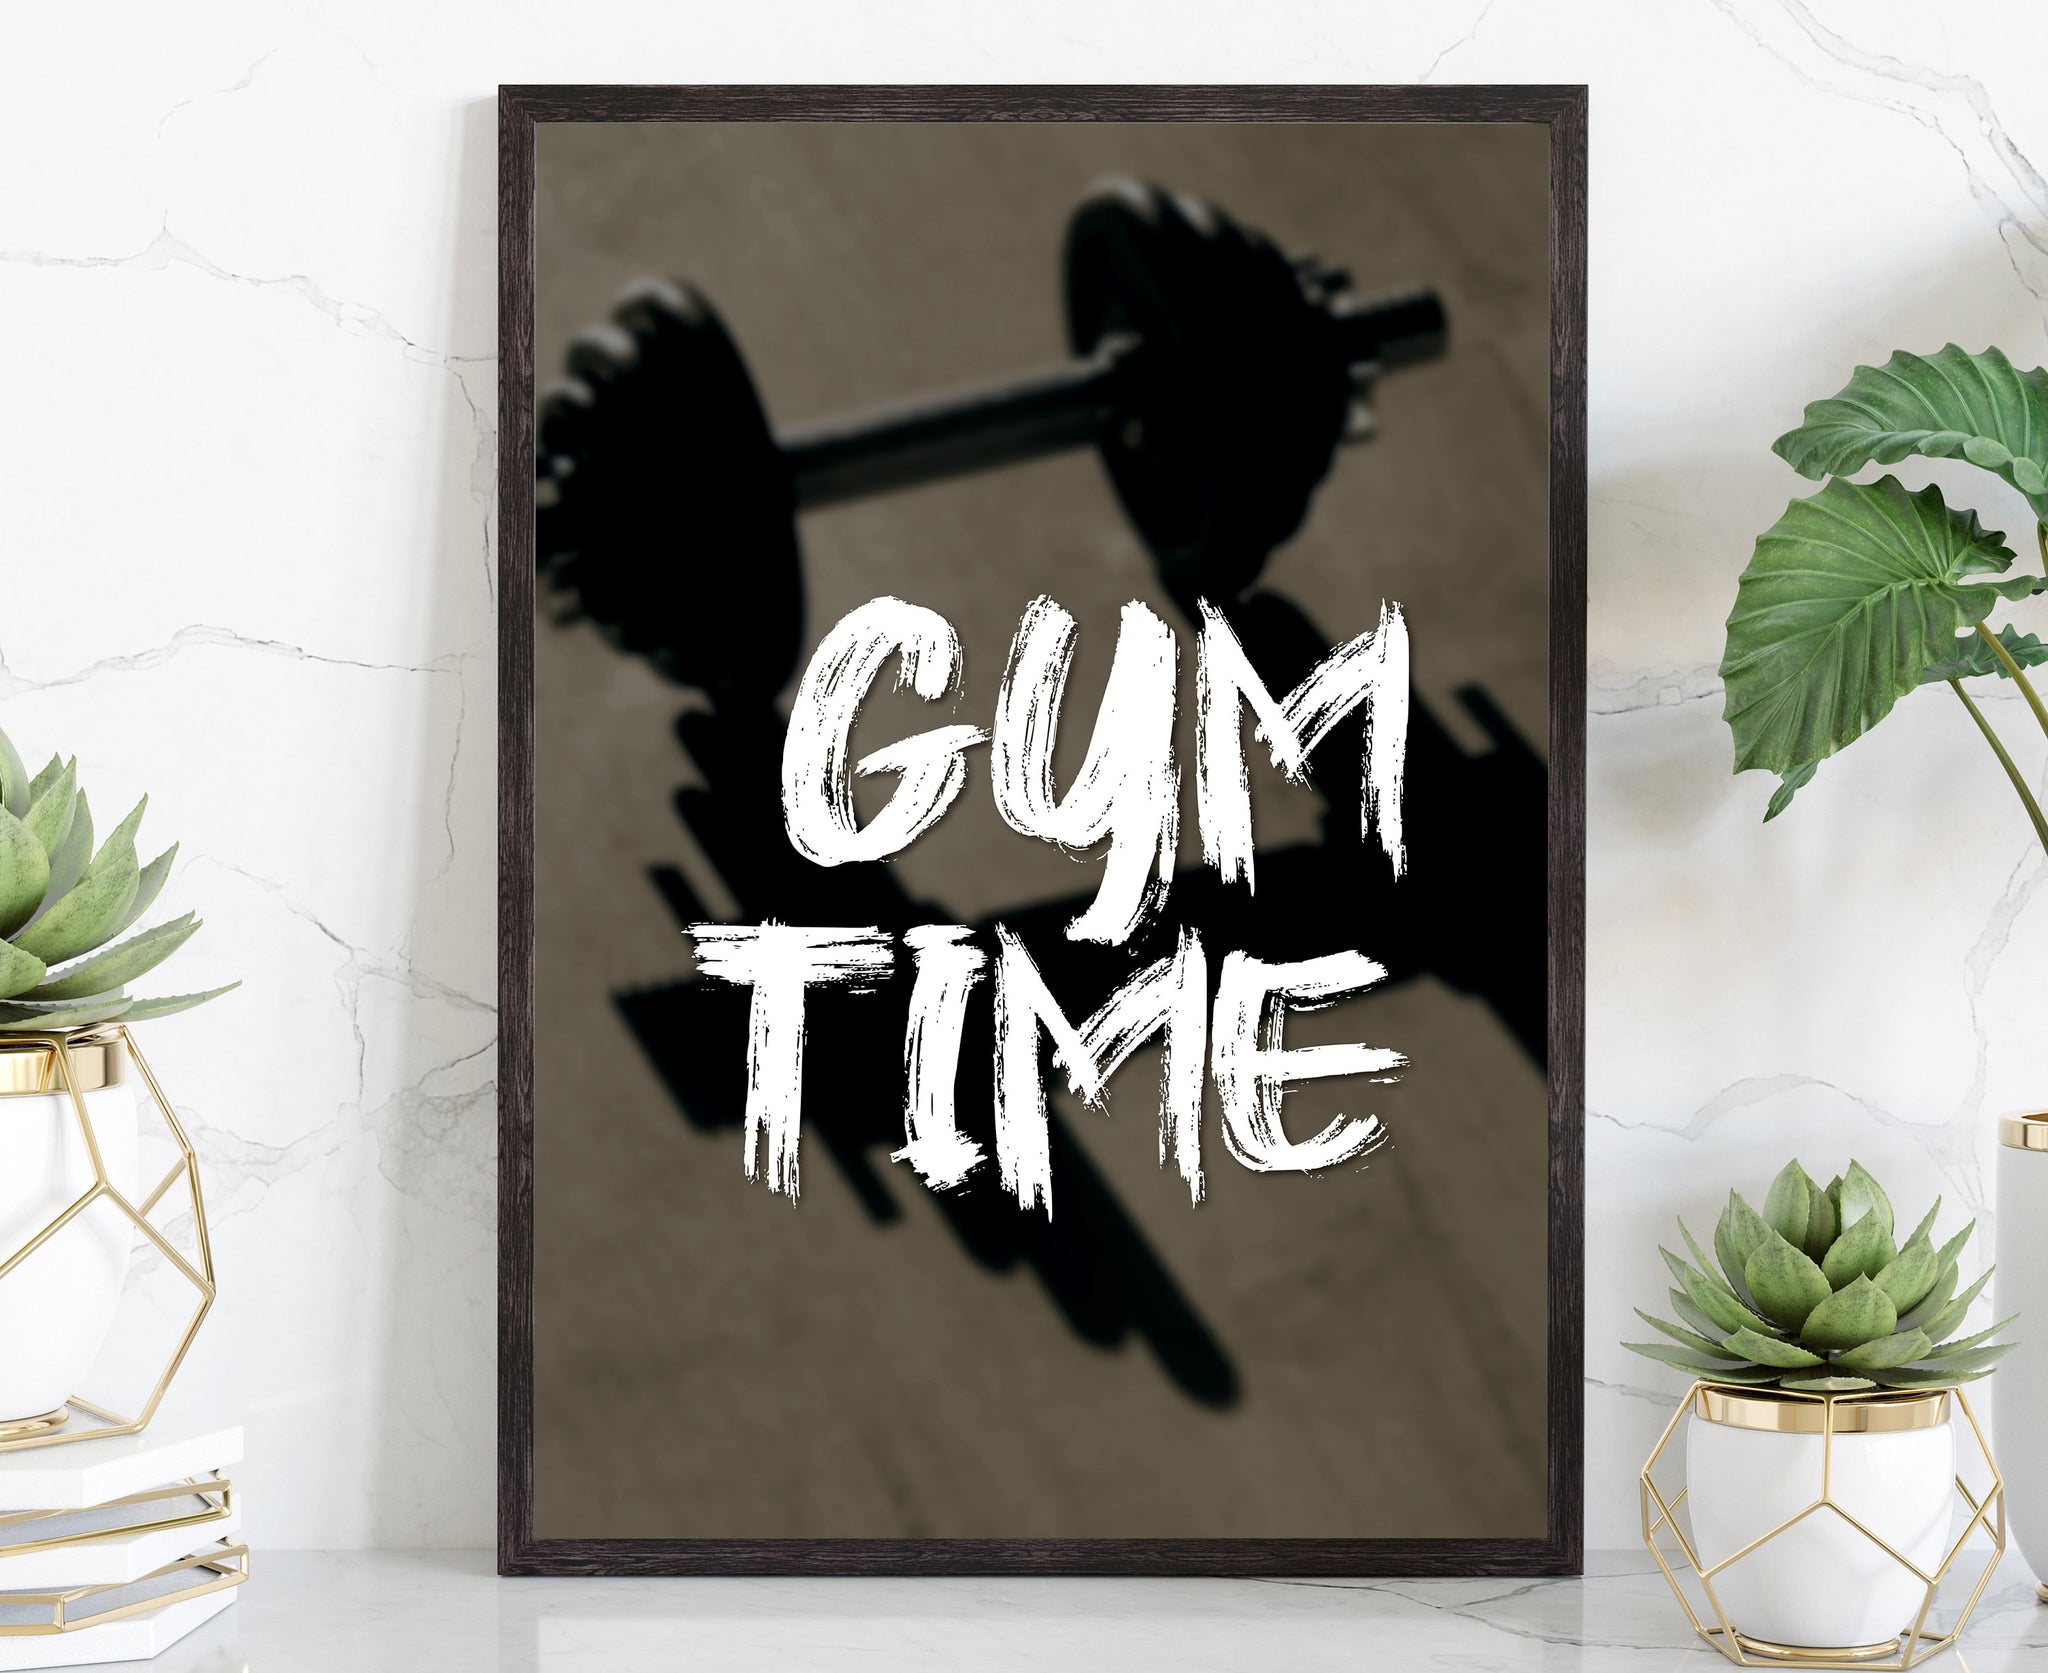 GYM TIME, Gym Posters, Gym Quotes, Poster Prints, Fitness Quotes, Fitness Decor, Home Wall Decor, Gym Wall Decor, Home Gym Wall Poster Decor